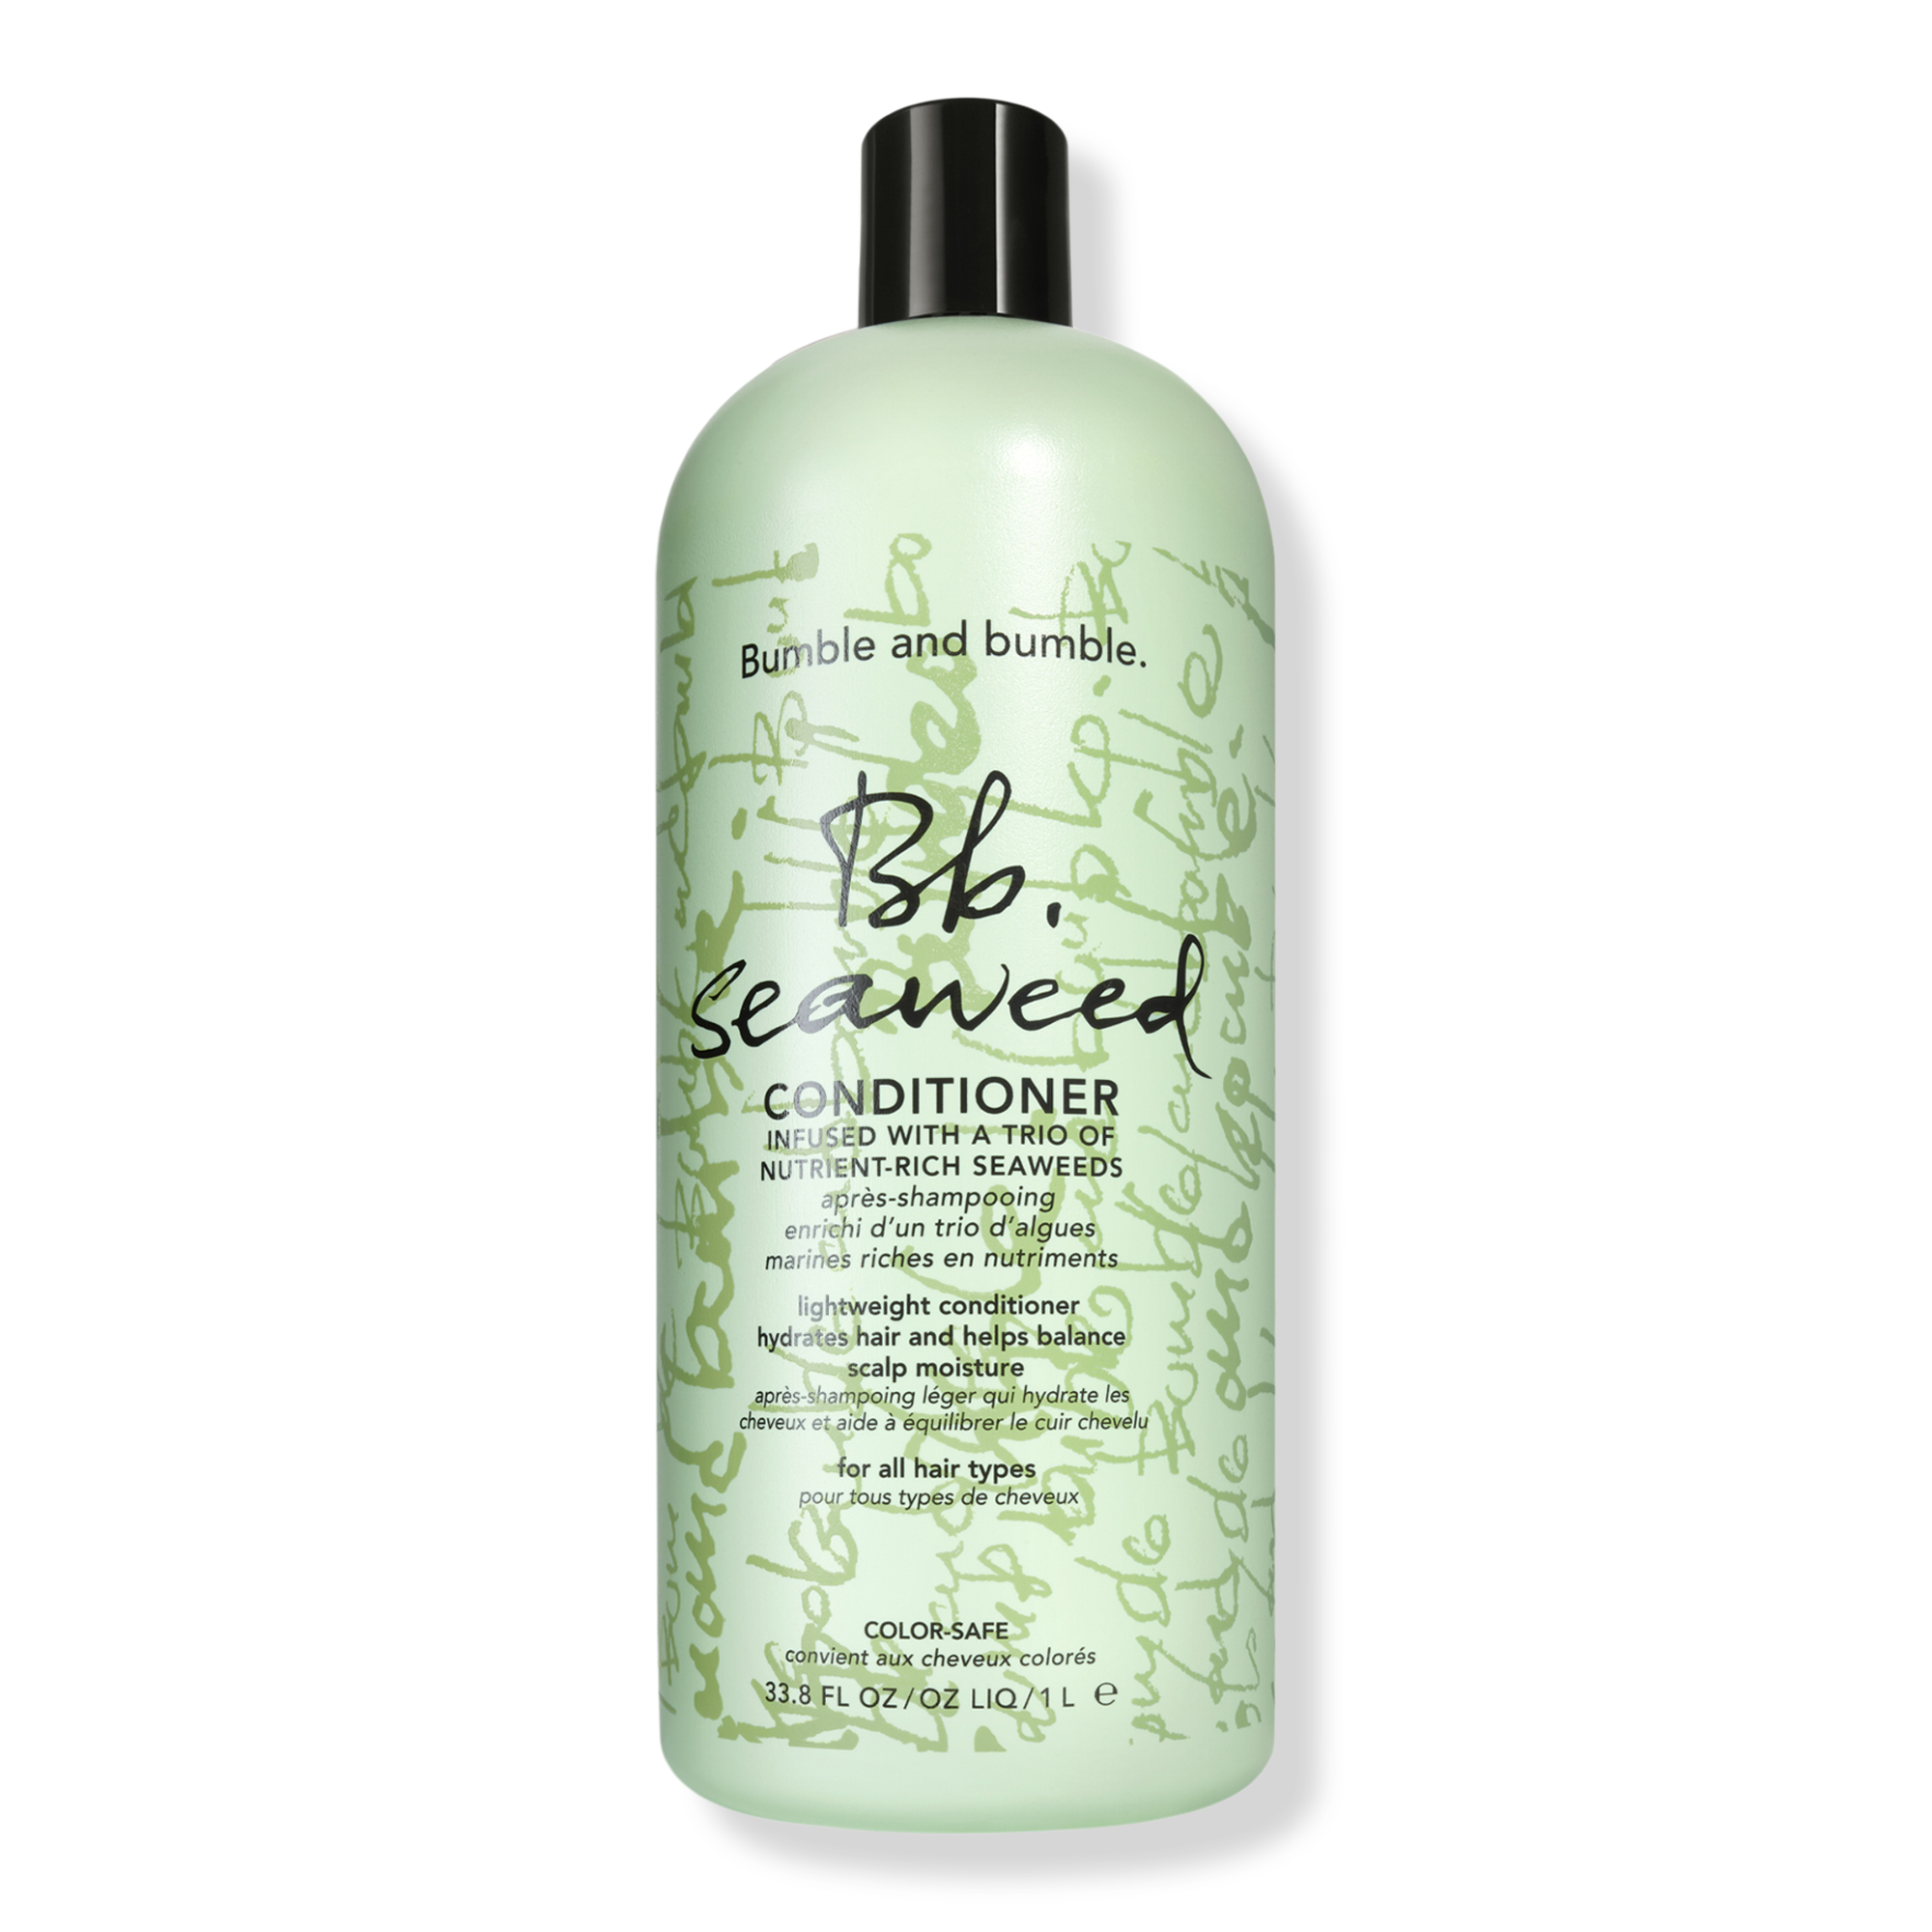 Bumble and bumble Bb.Seaweed Shampoo and Conditioner Liter Duo ($216 Value)